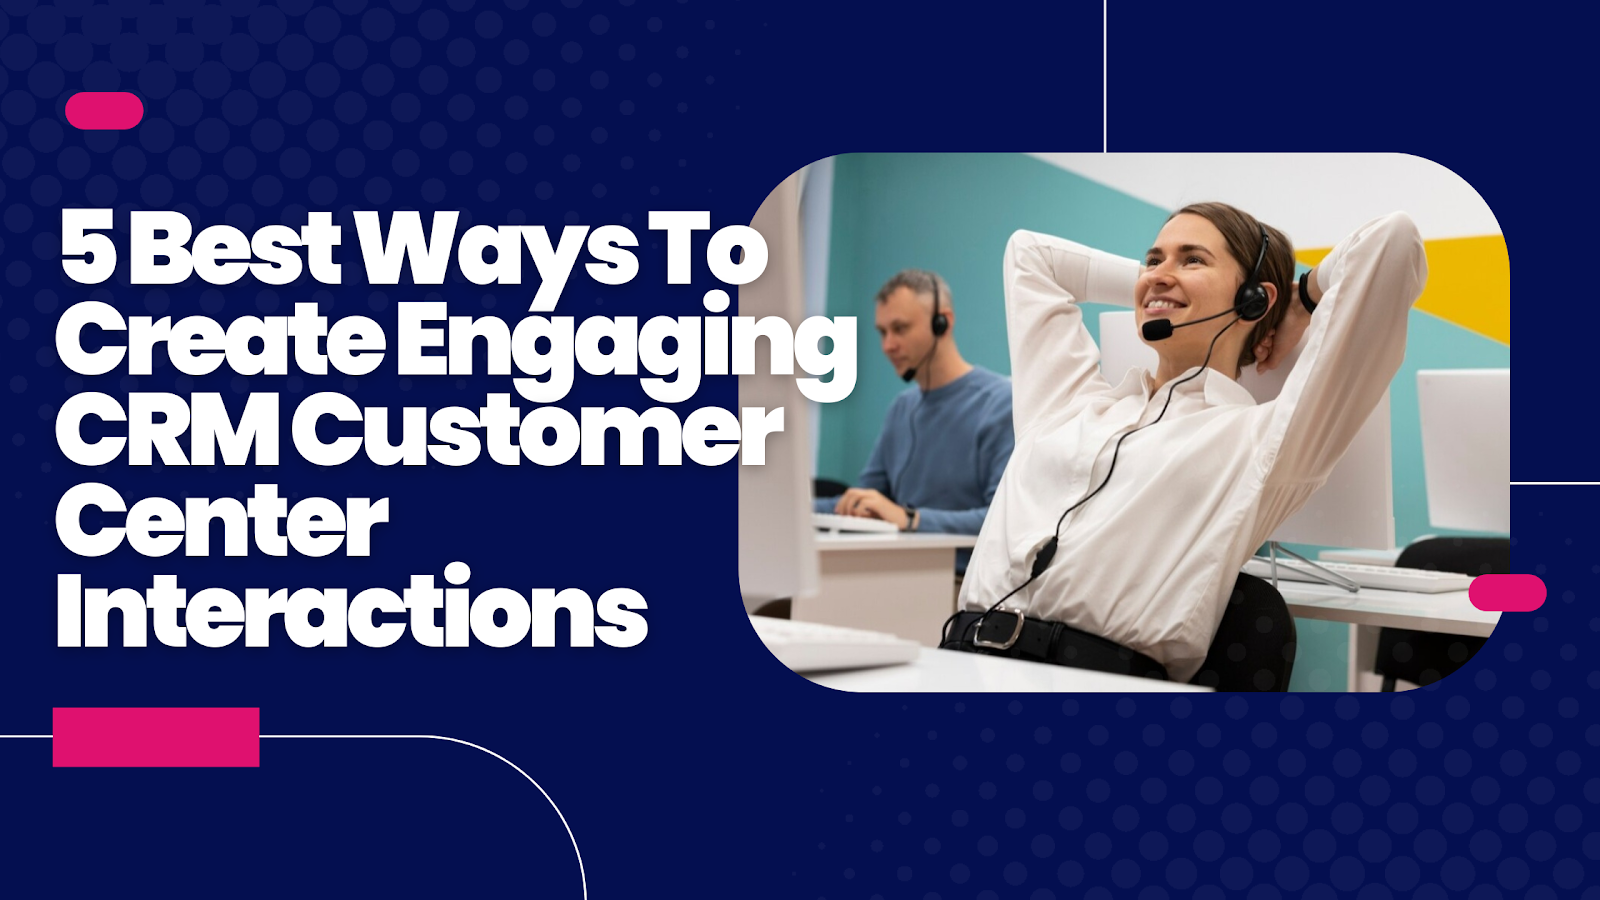 5 Best Ways to Create Engaging CRM Customer Centre Interactions